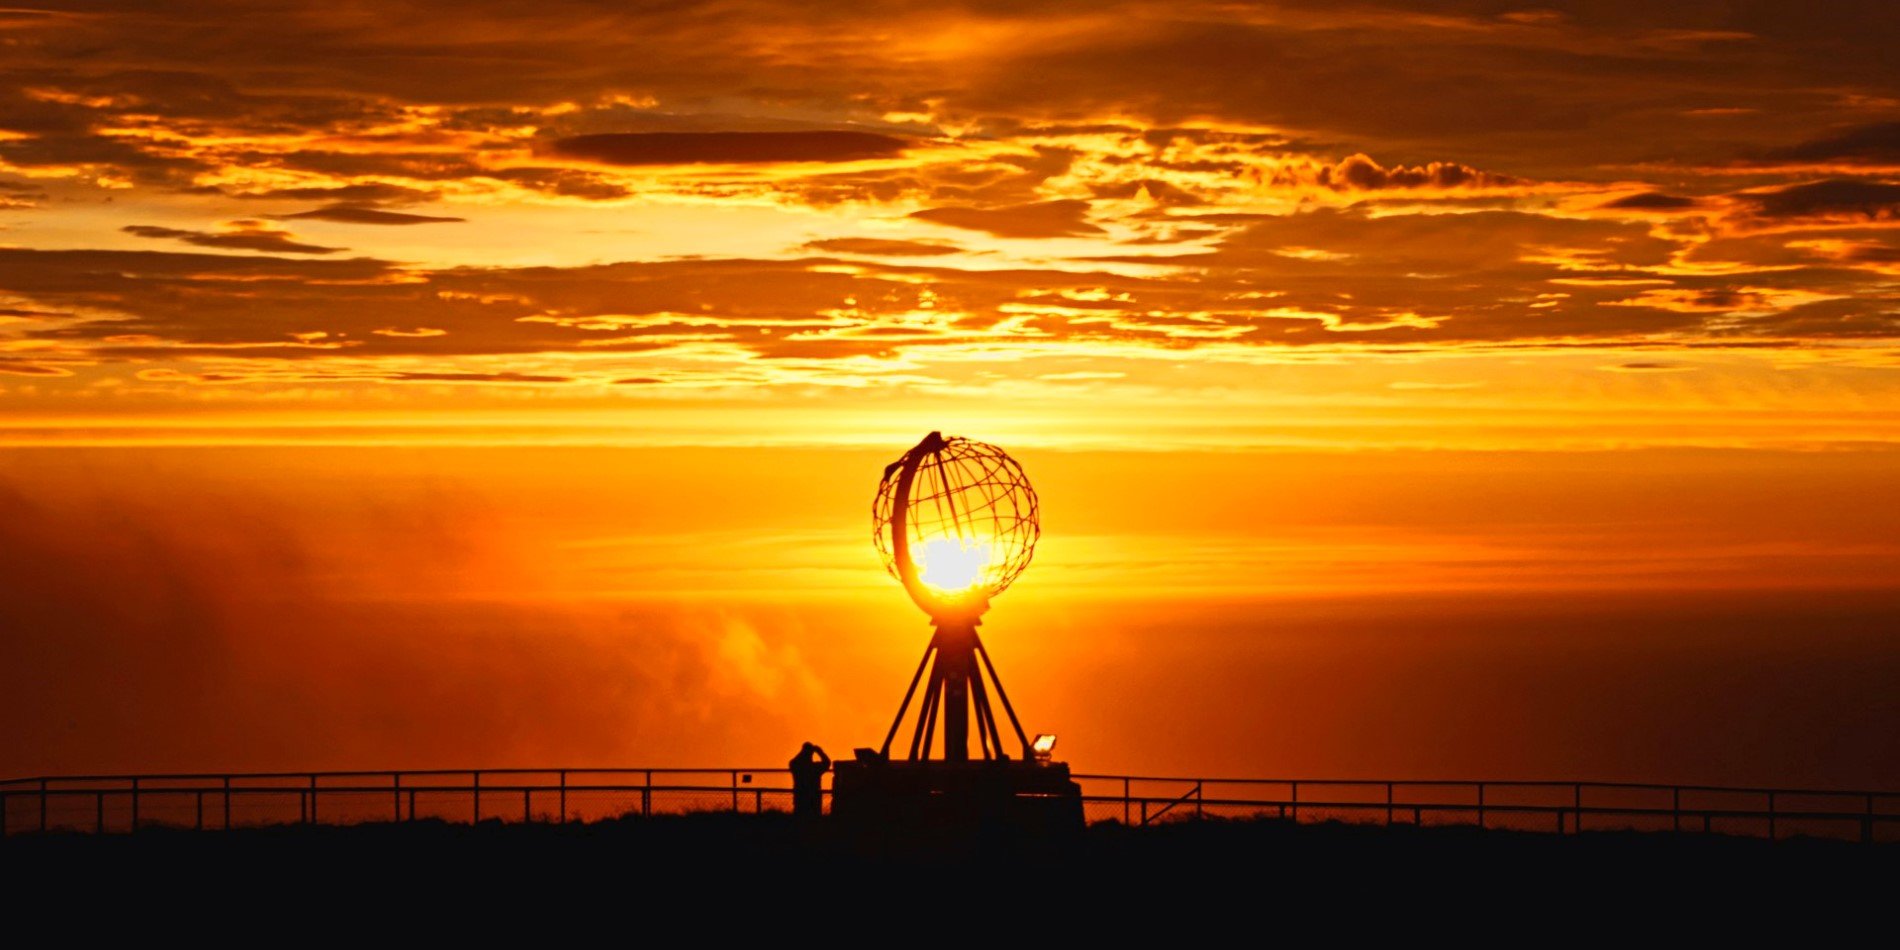 Evening in the North Cape, Norway – the land of the midnight sun.